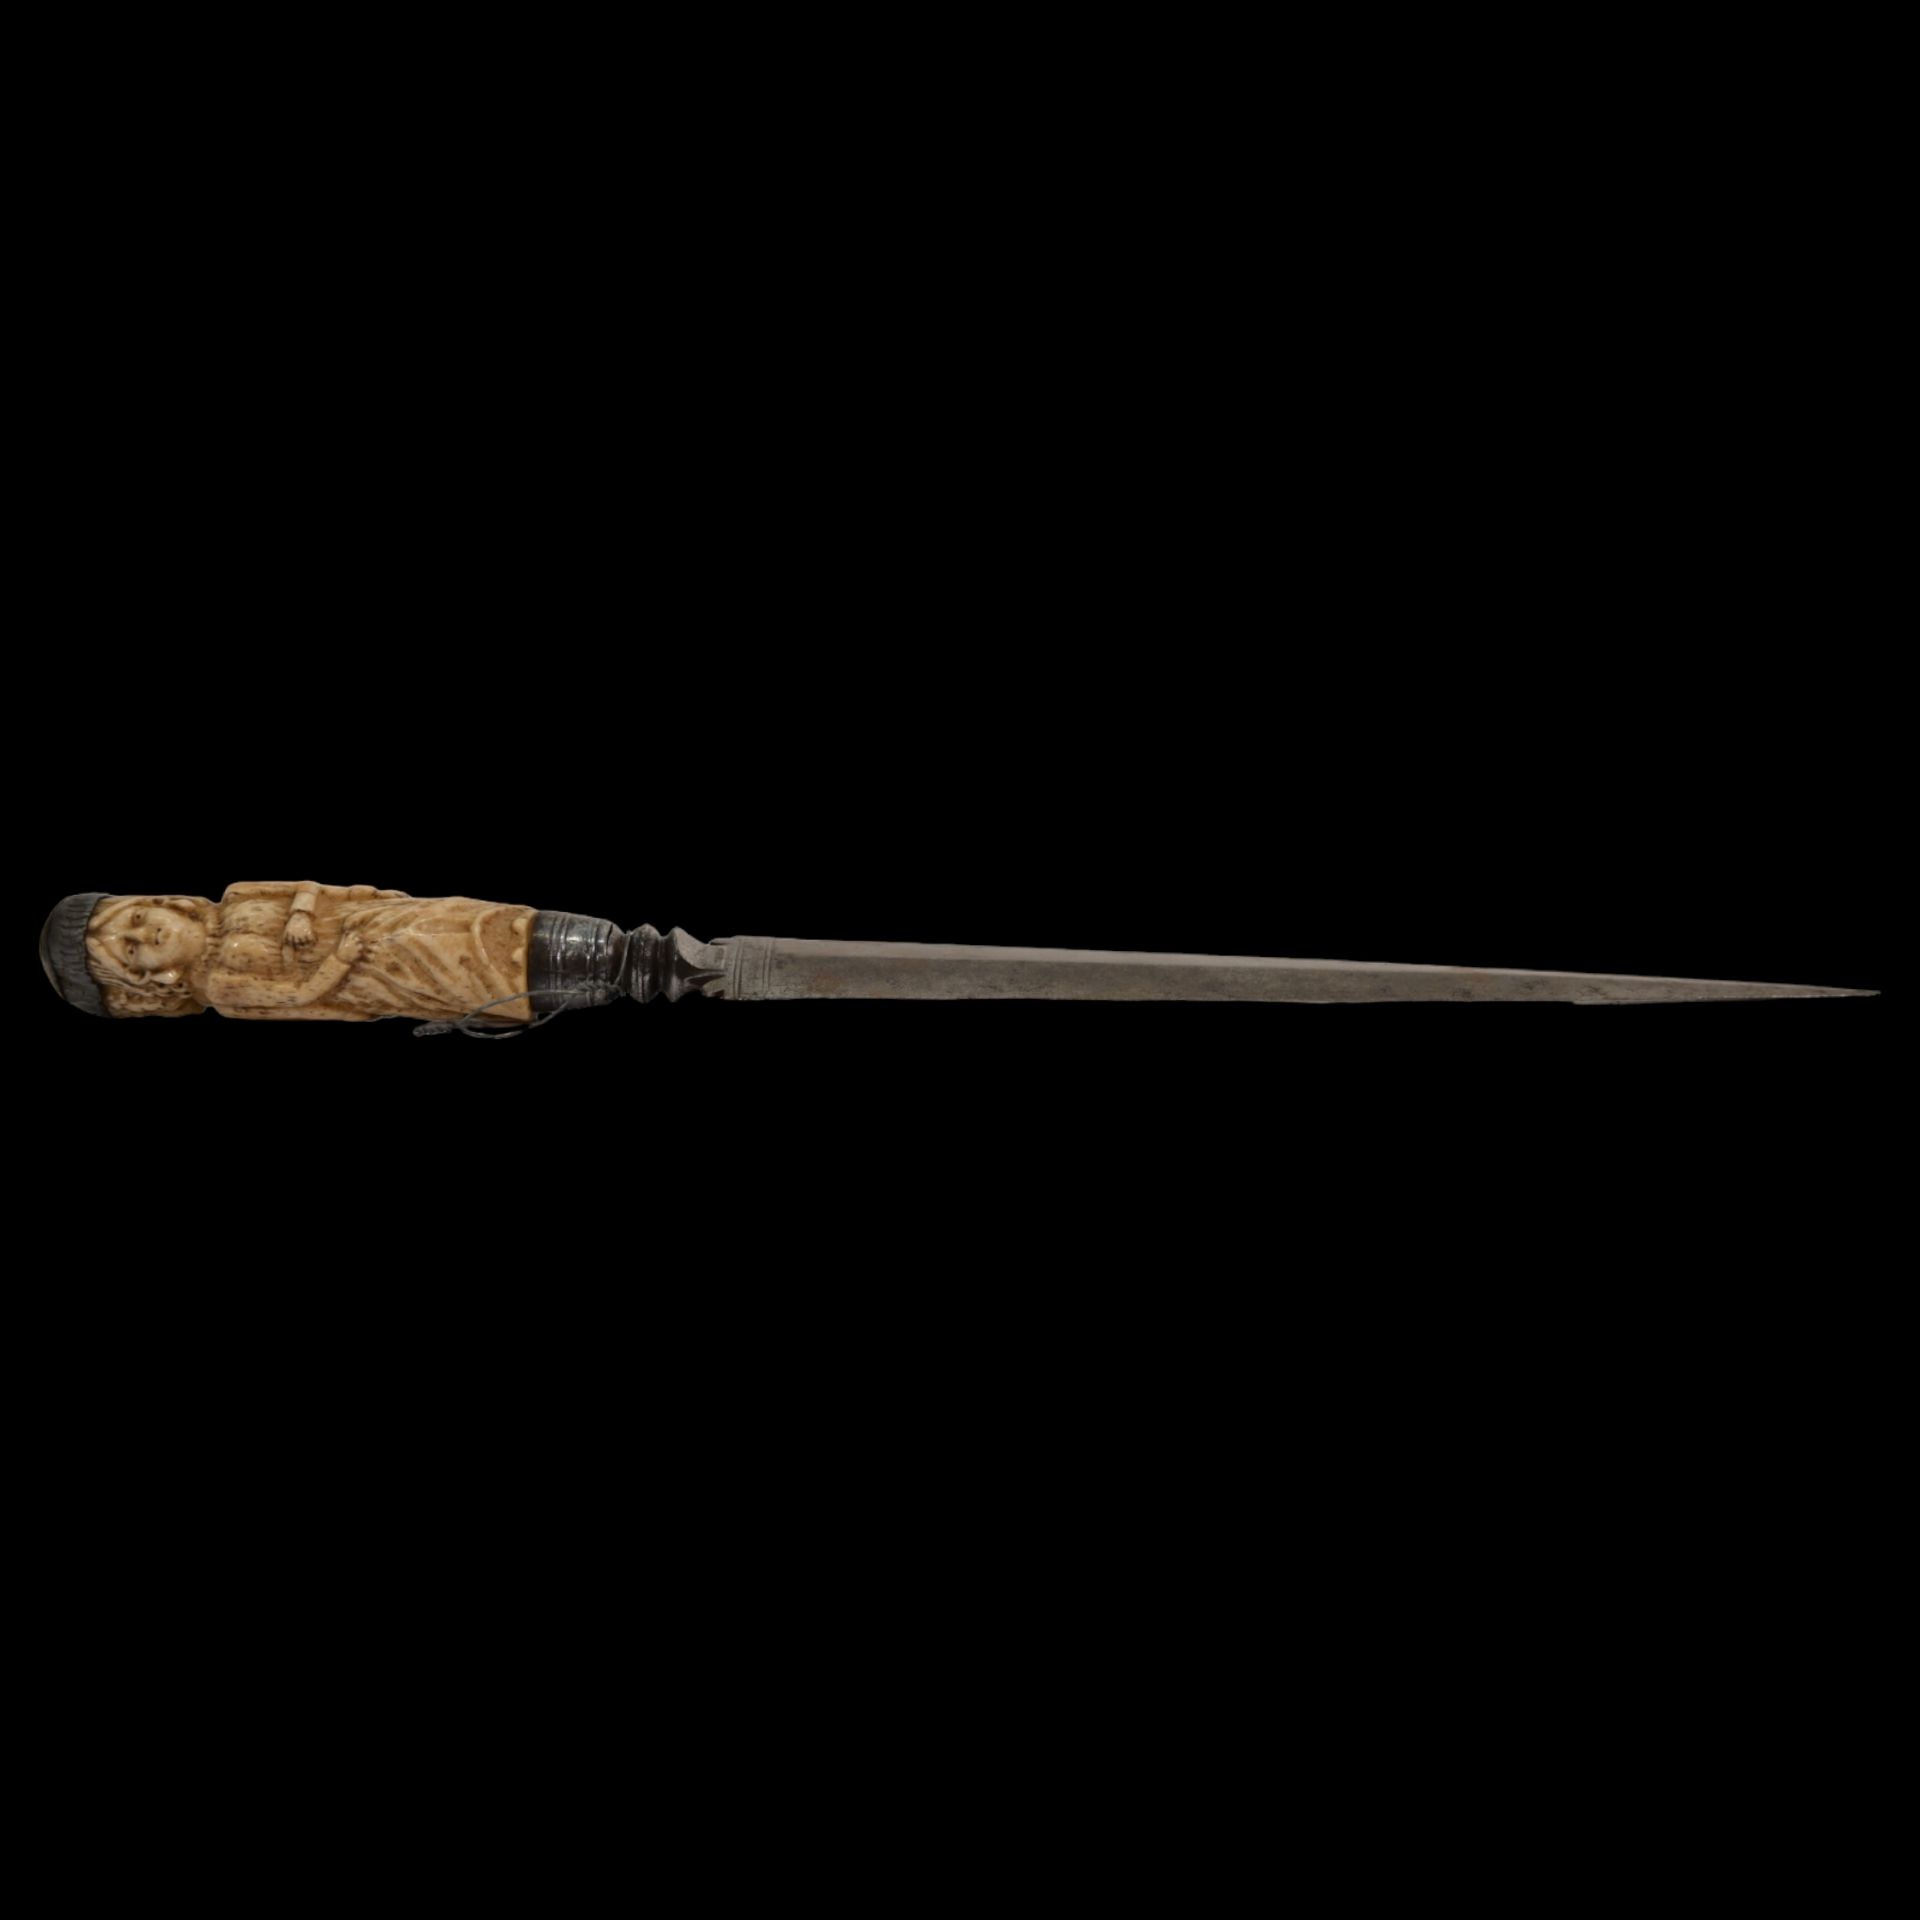 An Italian hunting dagger, 18th century, carved bone handle. - Image 4 of 11